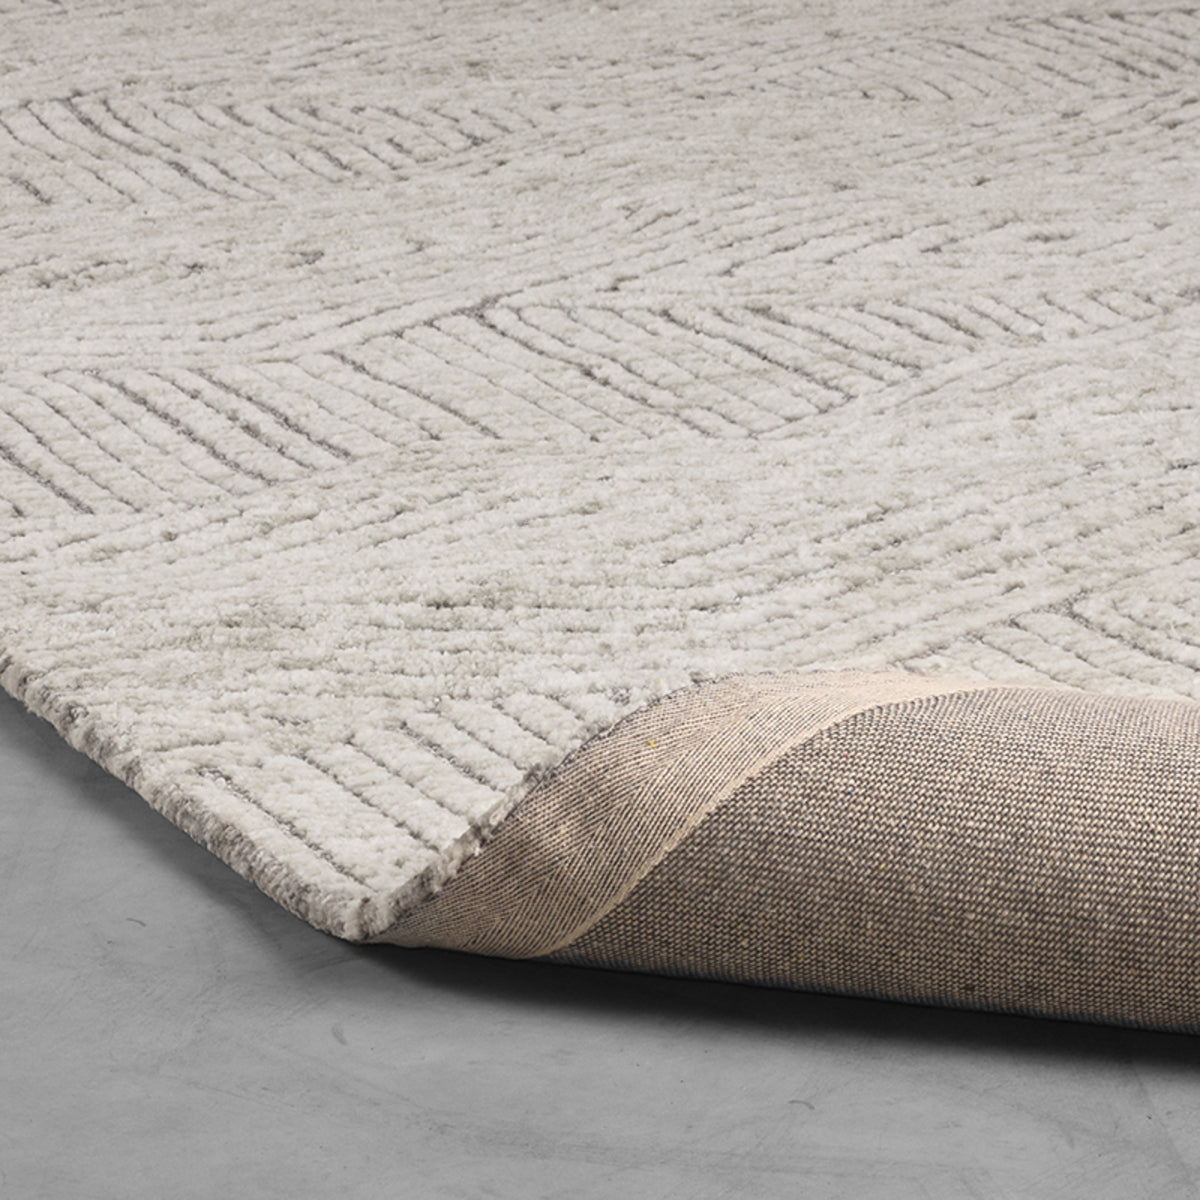 LABEL51 Rugs Cozy - Gray - Synthetic - 200x300 cm